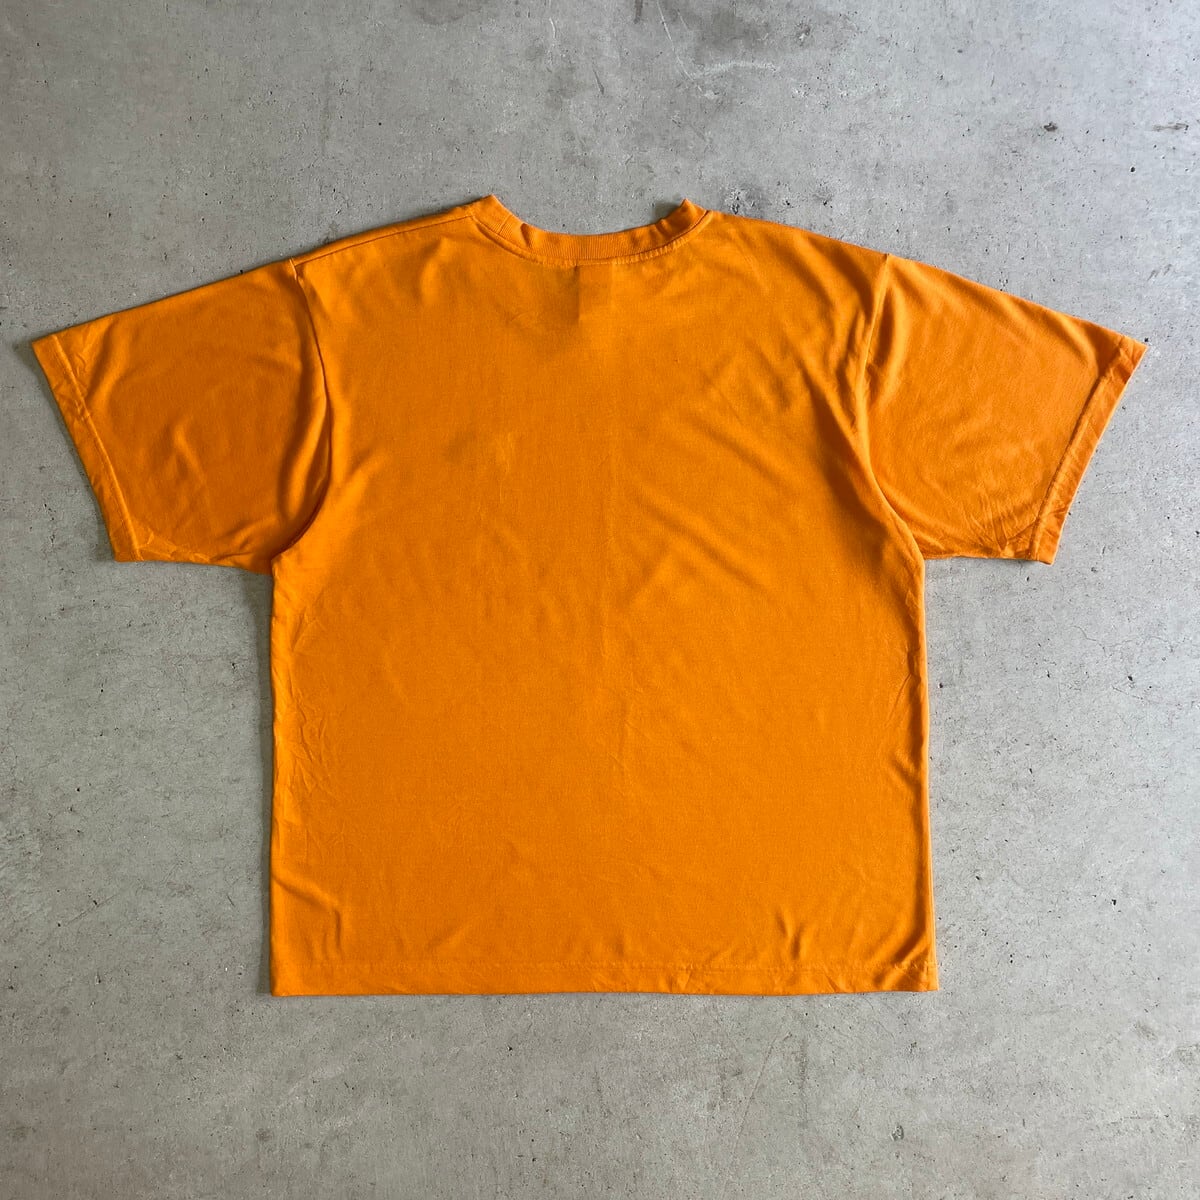 THE NORTH FACE ザ ノースフェイス VAPORWICK Tシャツ メンズL 古着 ワンポイントロゴ刺繍 半袖 オレンジ  【Tシャツ】【AN20】【PS2307T】【SS2308-3】 | cave 古着屋【公式】古着通販サイト powered by BASE